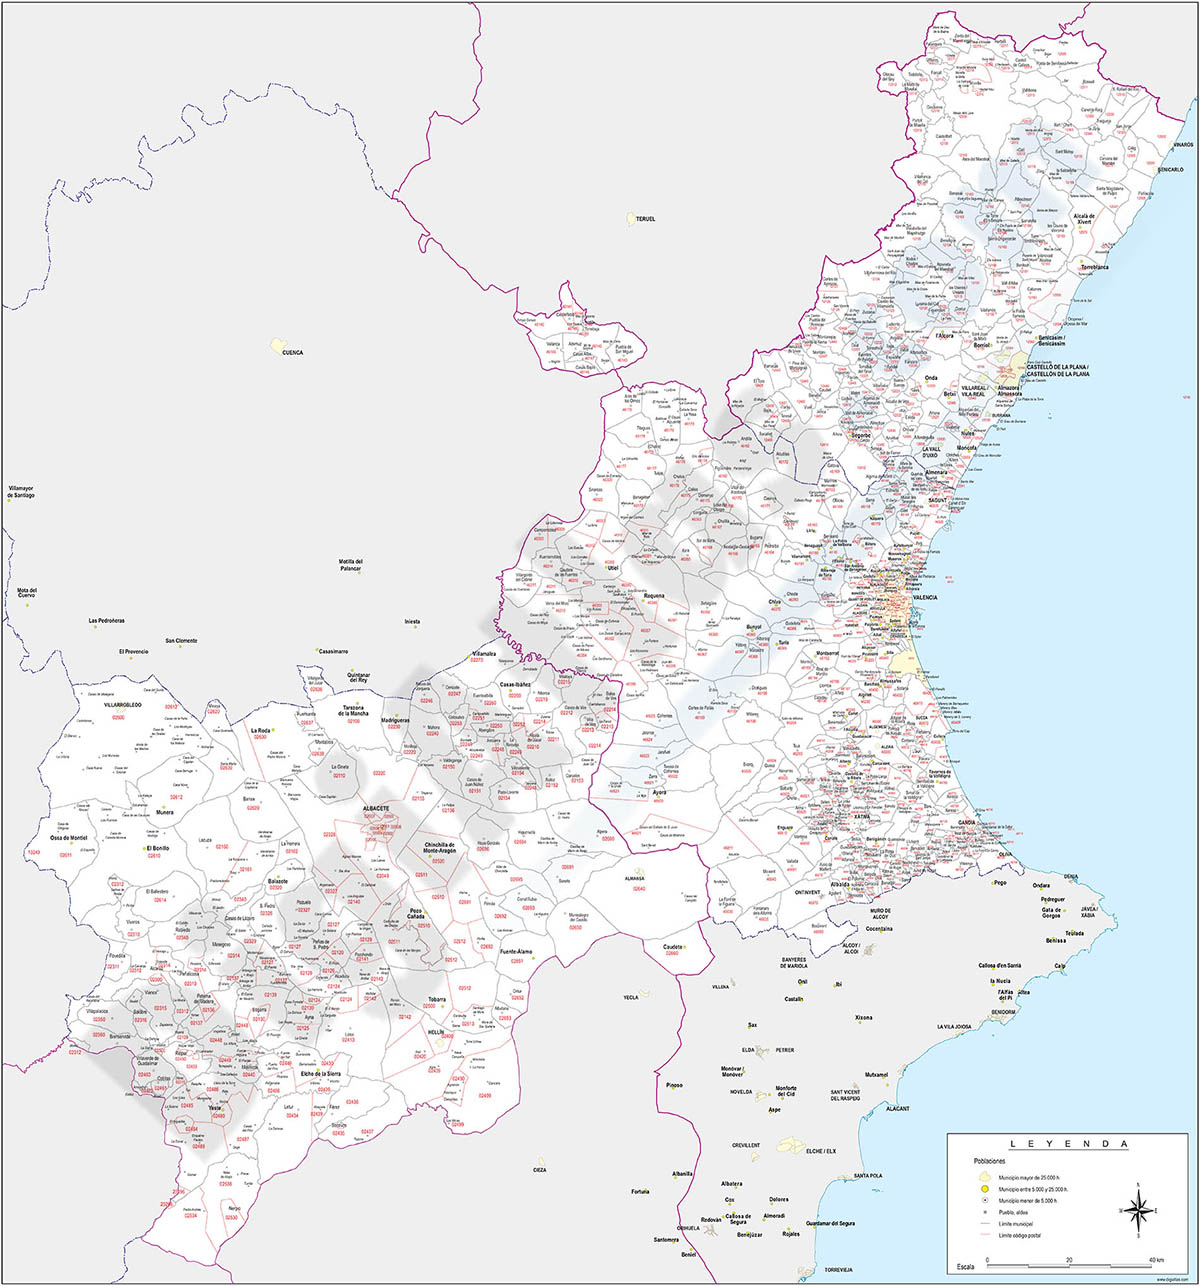 Map of Albacete, Valencia and Castellon provinces with municipalities and postal codes